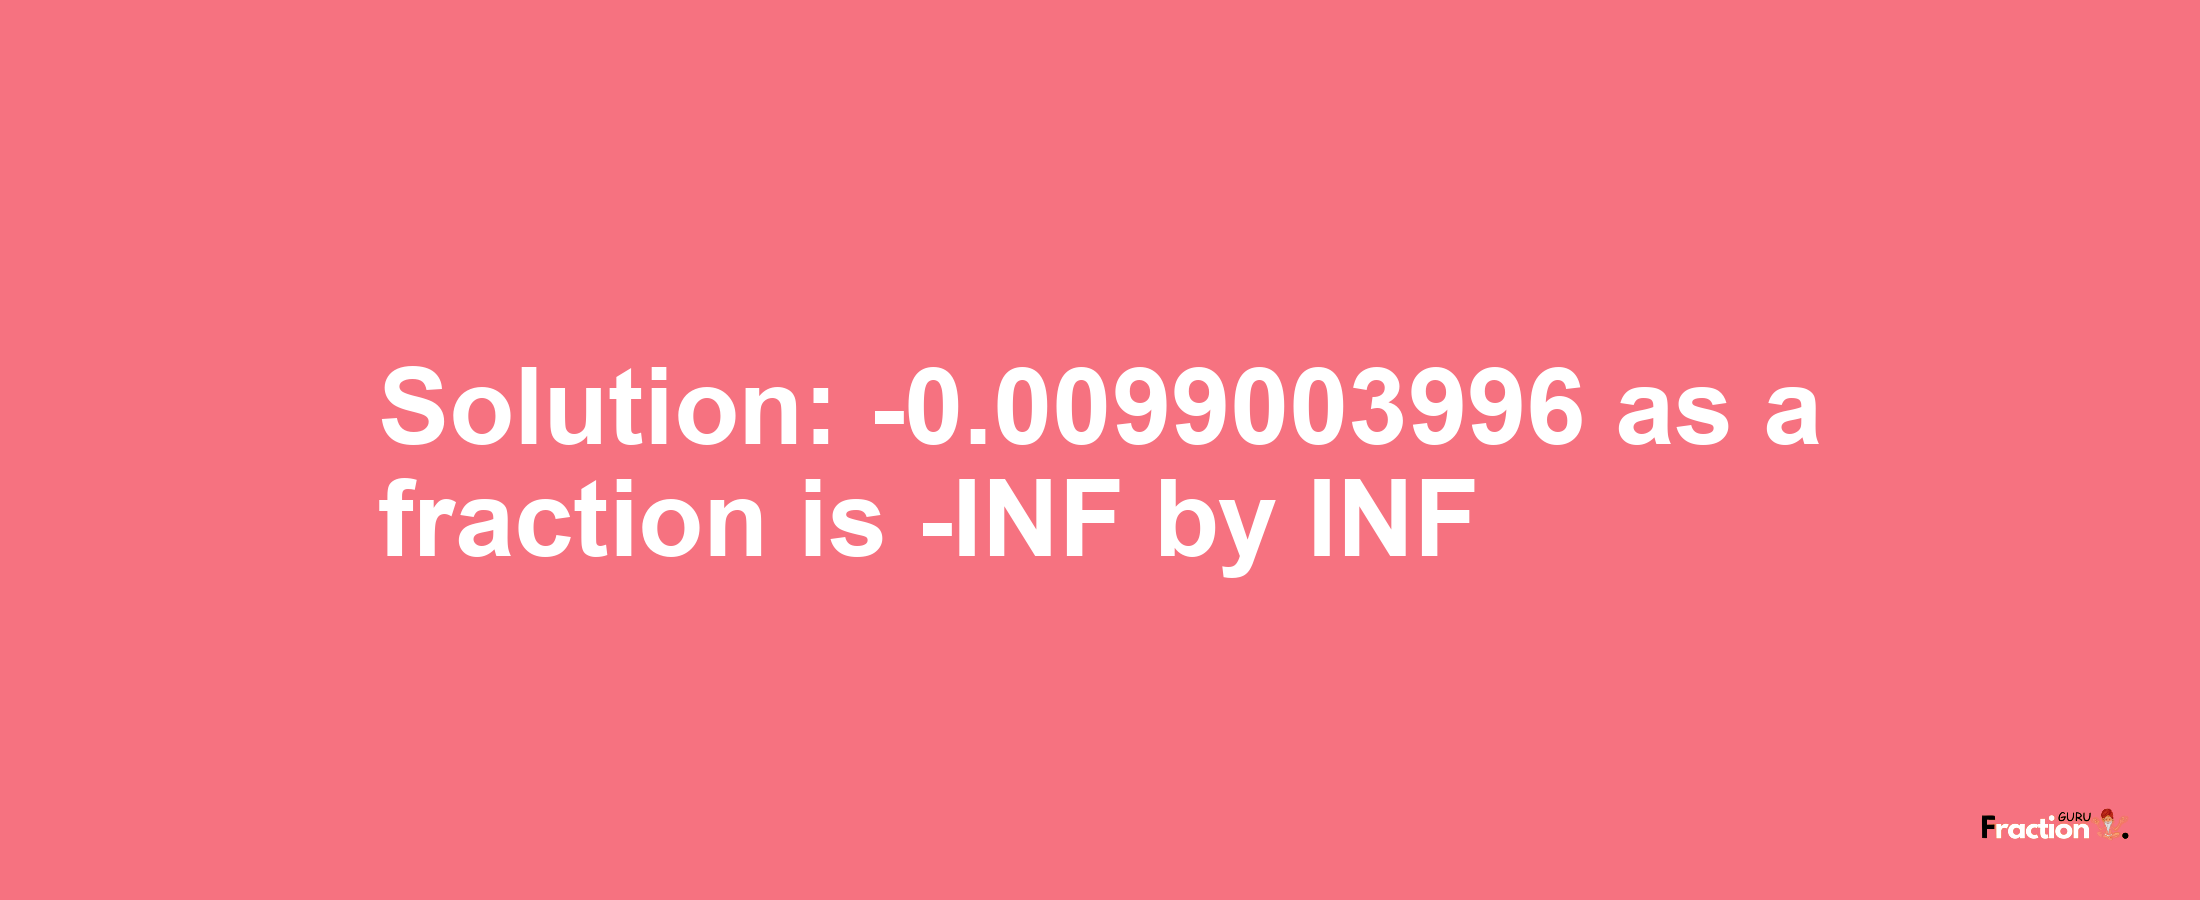 Solution:-0.0099003996 as a fraction is -INF/INF